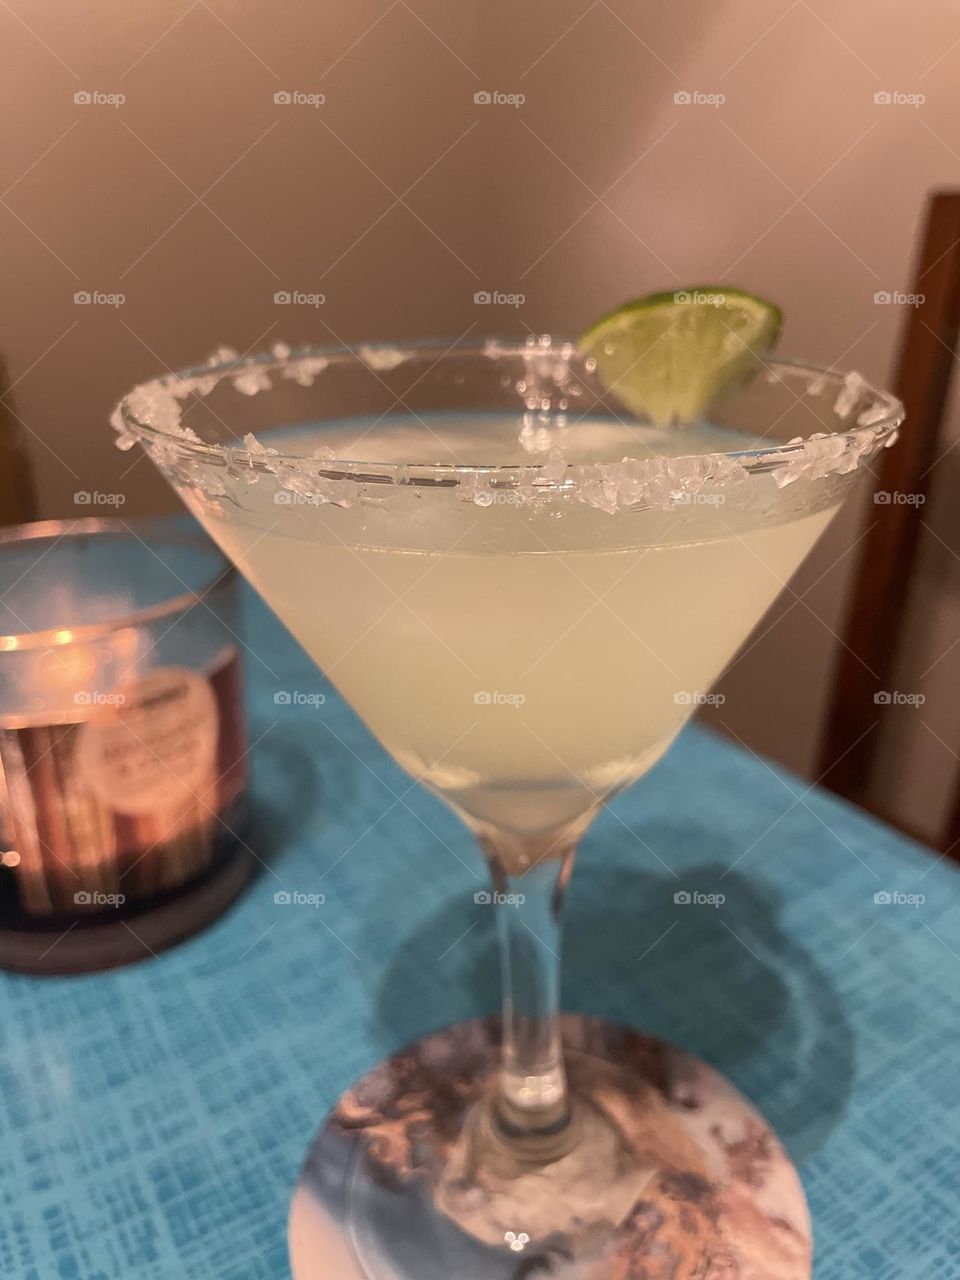 Zoomed in Margarita on a calm evening with candle lit in background